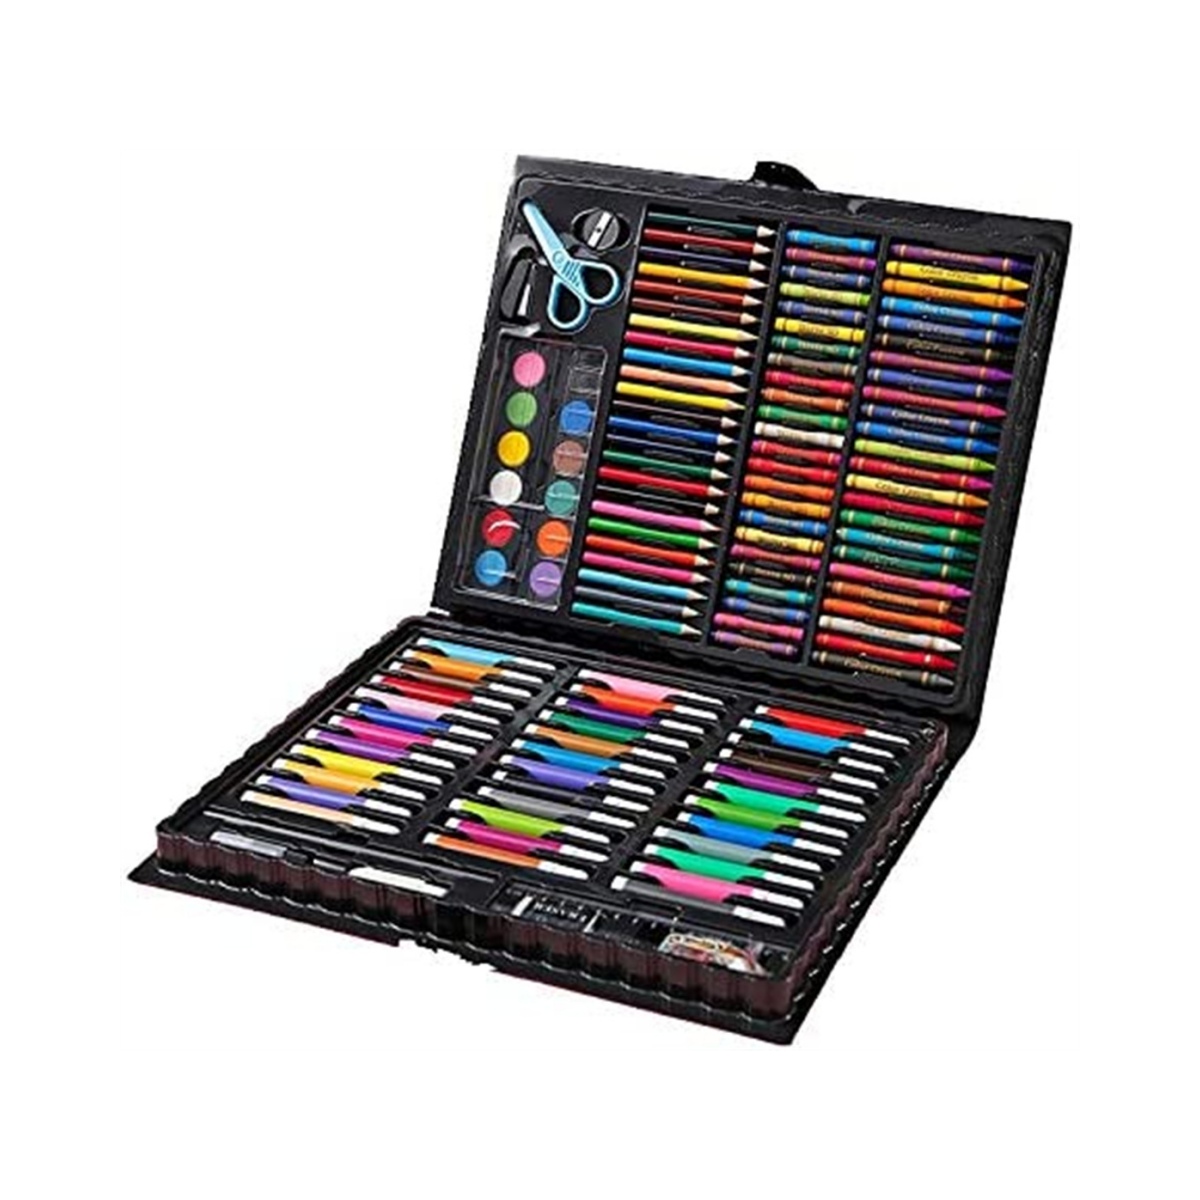  Hapikalor Art Supplies for Adults,156-Pack Art Kit Drawing Set  with 2 Sketch Book, Crayons, Colored Pencils, Arts and Crafts, Christmas  Gifts Art Supplies for Girls Boys Ages 6-8 9-12 13 14 Year Old